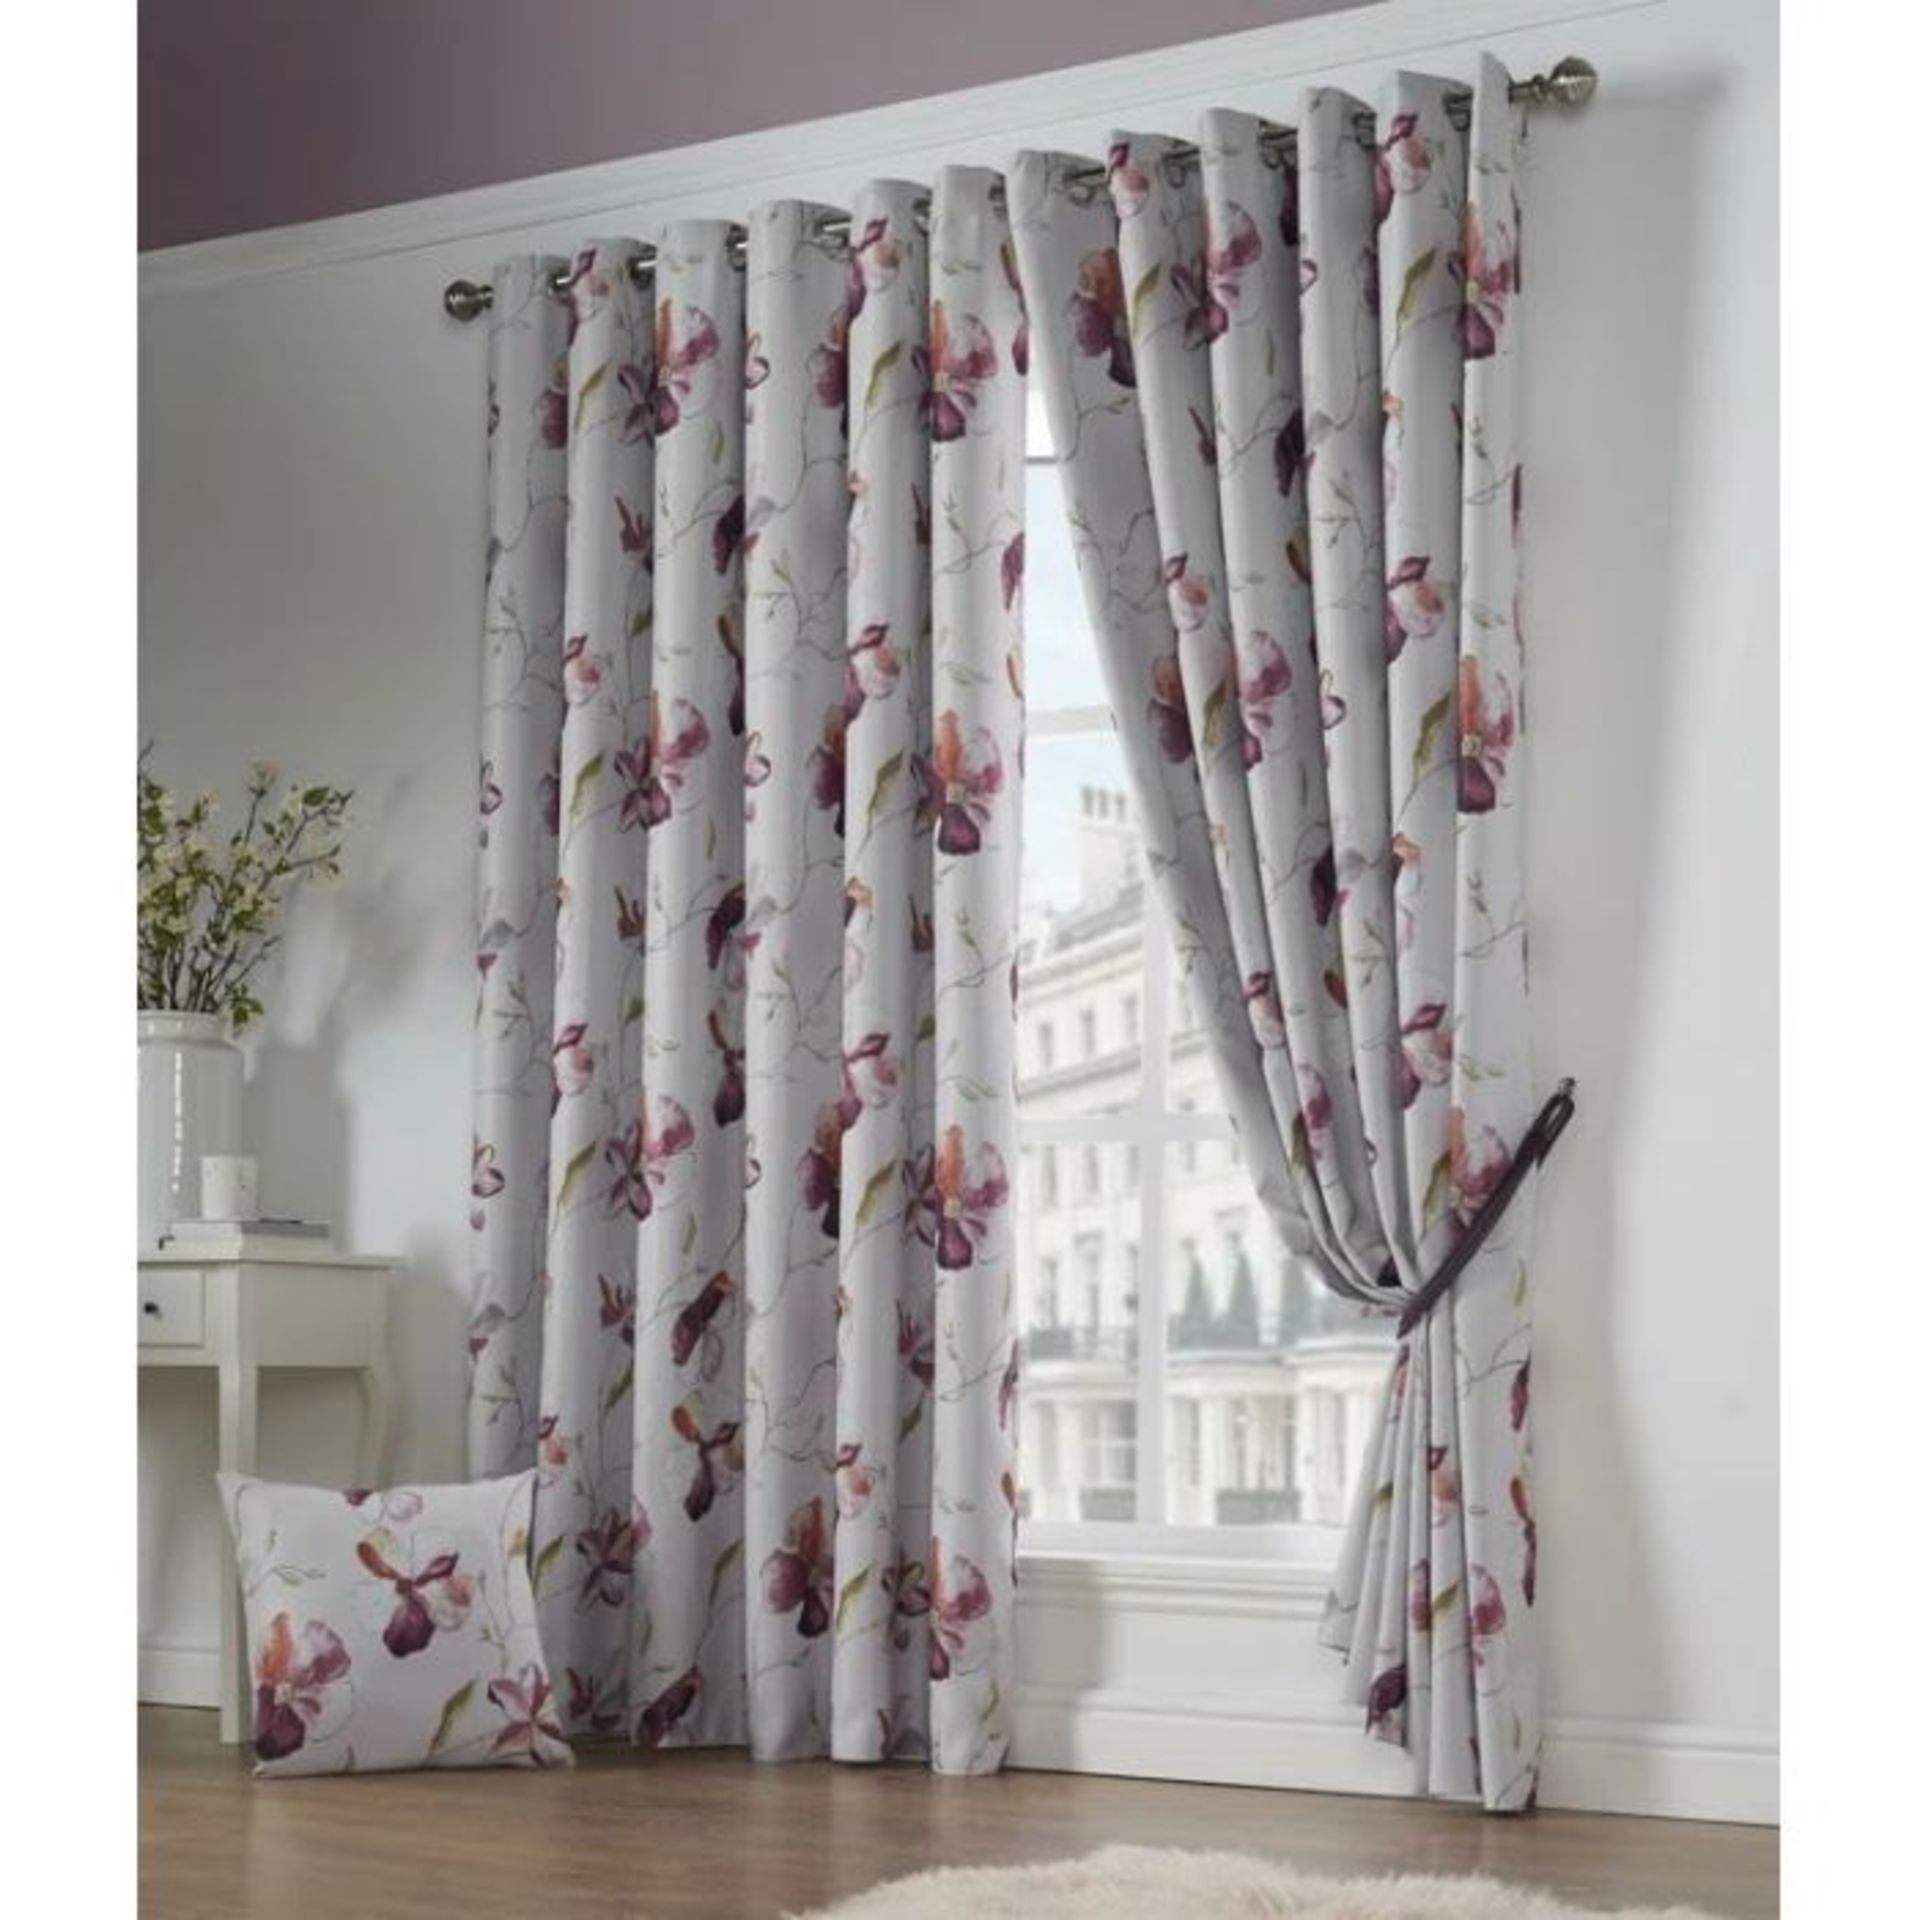 Ophelia & Co., Rodrigues Eyelet Blackout Curtains (WHITE & PINK FLORAL PATTERN) (229 W x 274 D cm) - - Image 2 of 4